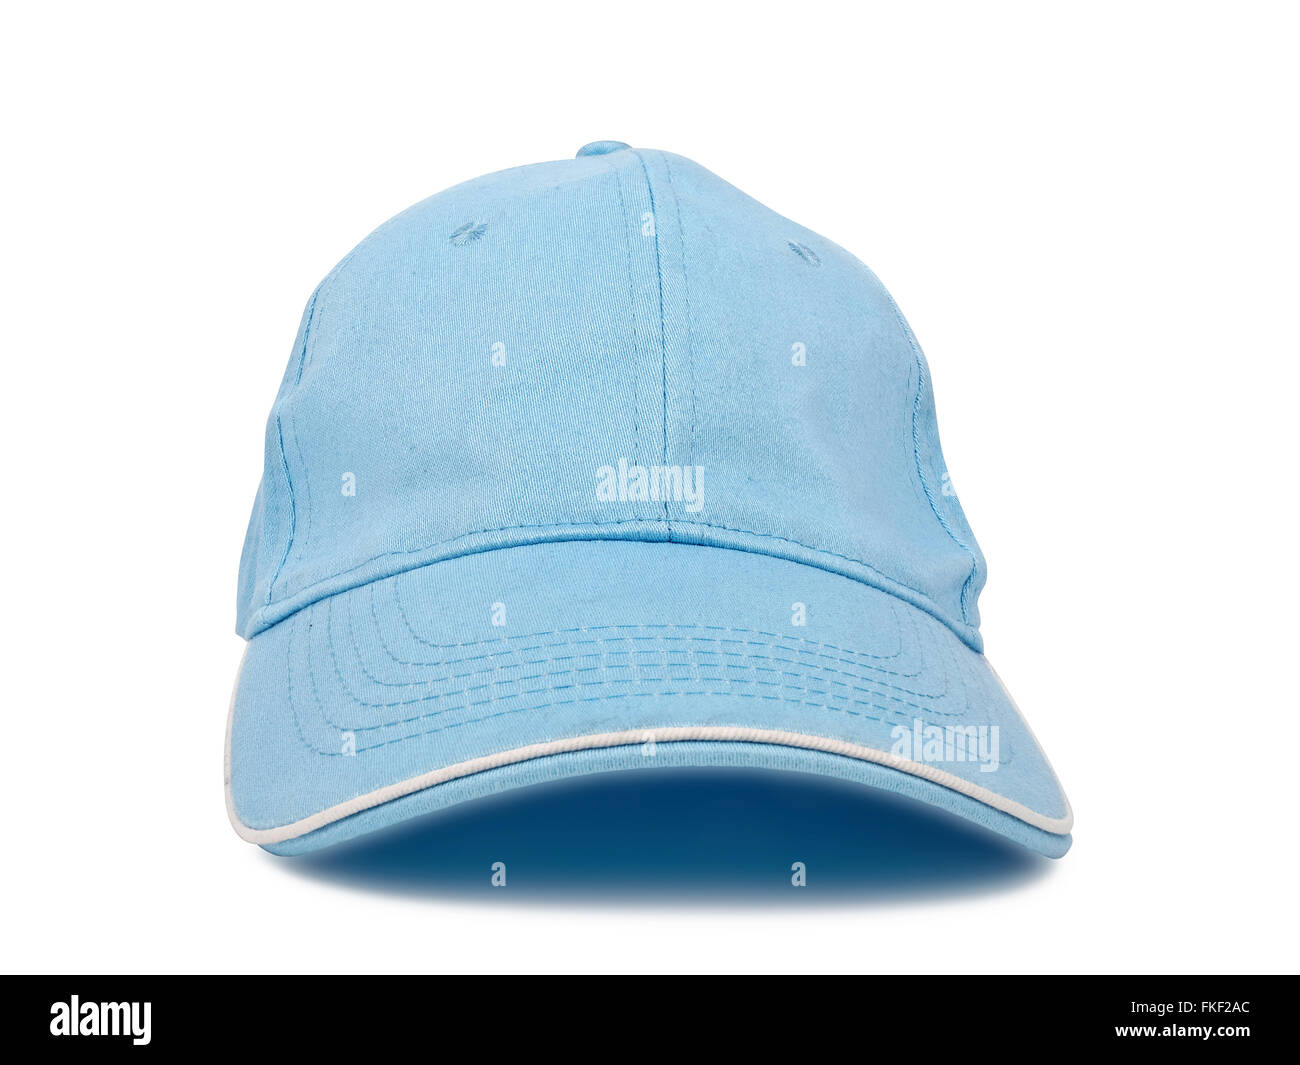 Casquette bleu clair isolated on white background, studio shot Banque D'Images